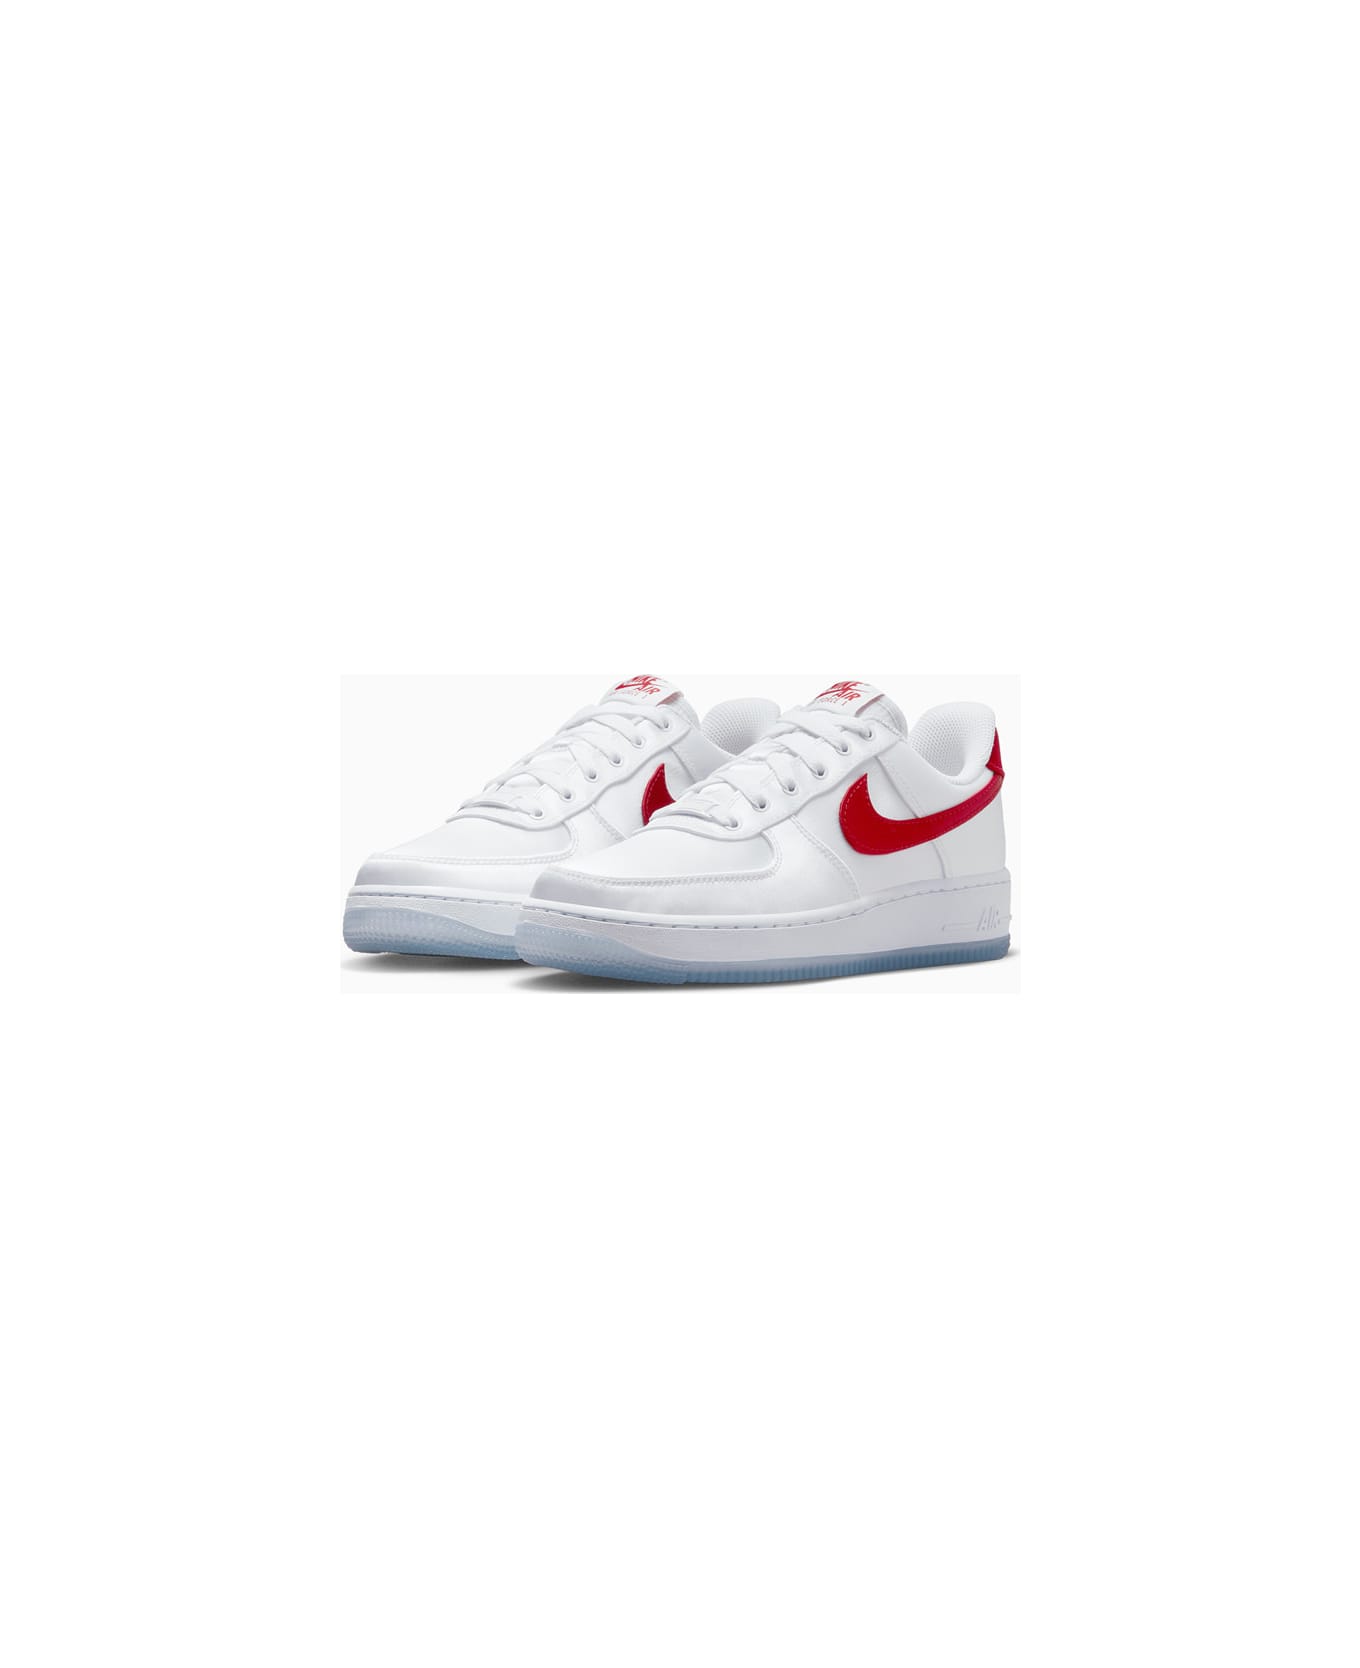 Nike Air Force 1 '07 Ess Snkr Sneakers Dx6541-100 - White